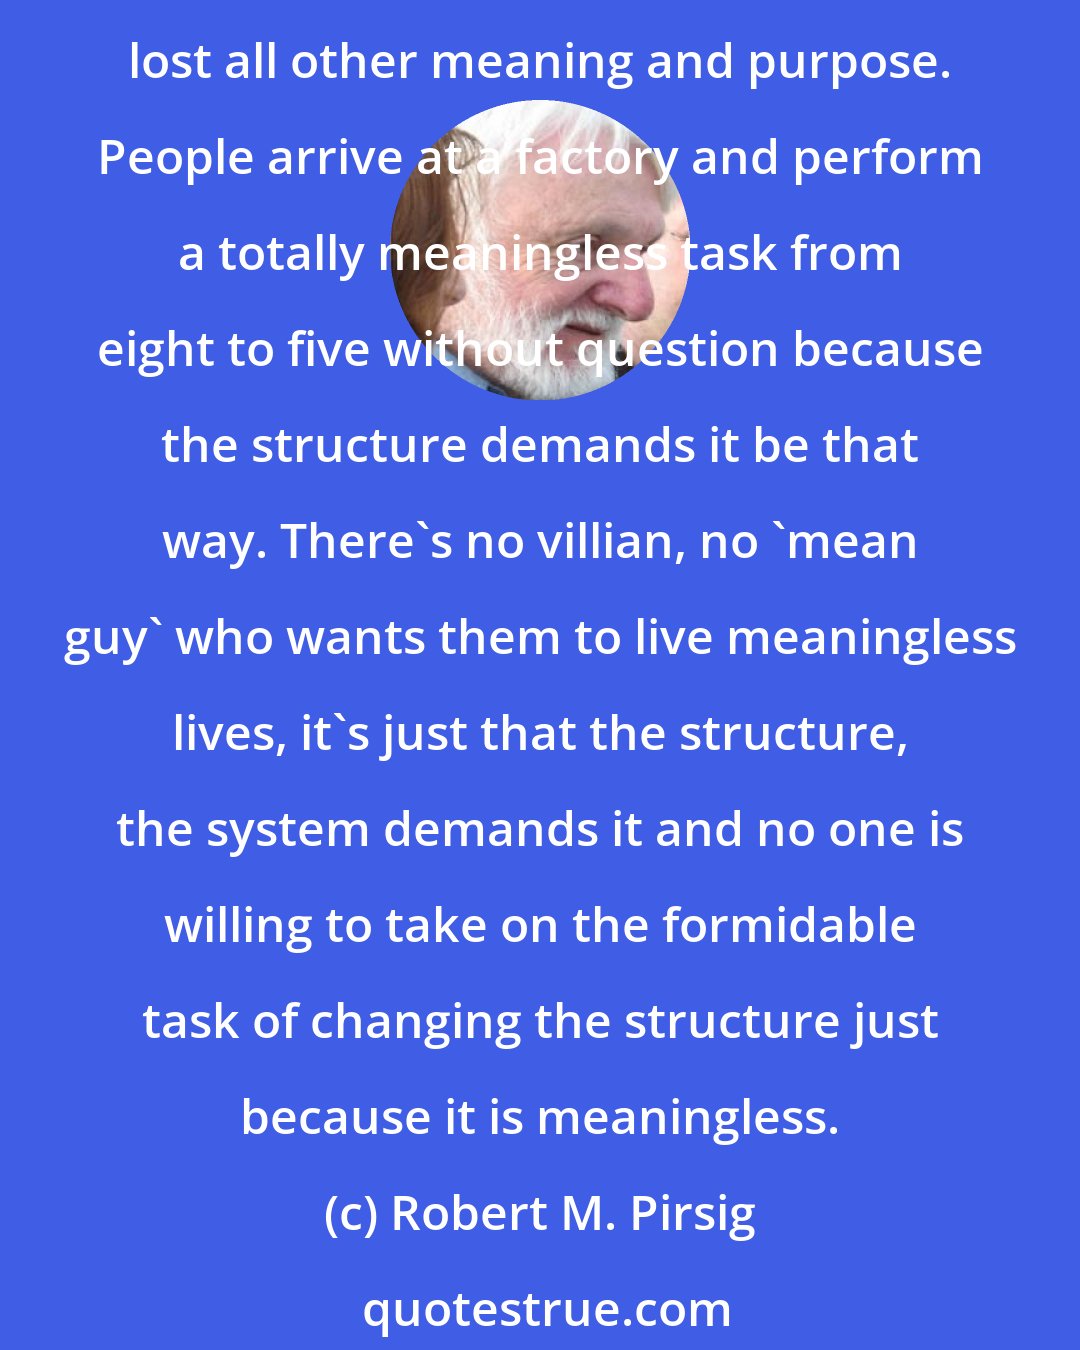 Robert M. Pirsig: To speak of certain government and establishment institutions as 'the system' is to speak correctly . . . They are sustained by structural relationships even when they have lost all other meaning and purpose. People arrive at a factory and perform a totally meaningless task from eight to five without question because the structure demands it be that way. There's no villian, no 'mean guy' who wants them to live meaningless lives, it's just that the structure, the system demands it and no one is willing to take on the formidable task of changing the structure just because it is meaningless.